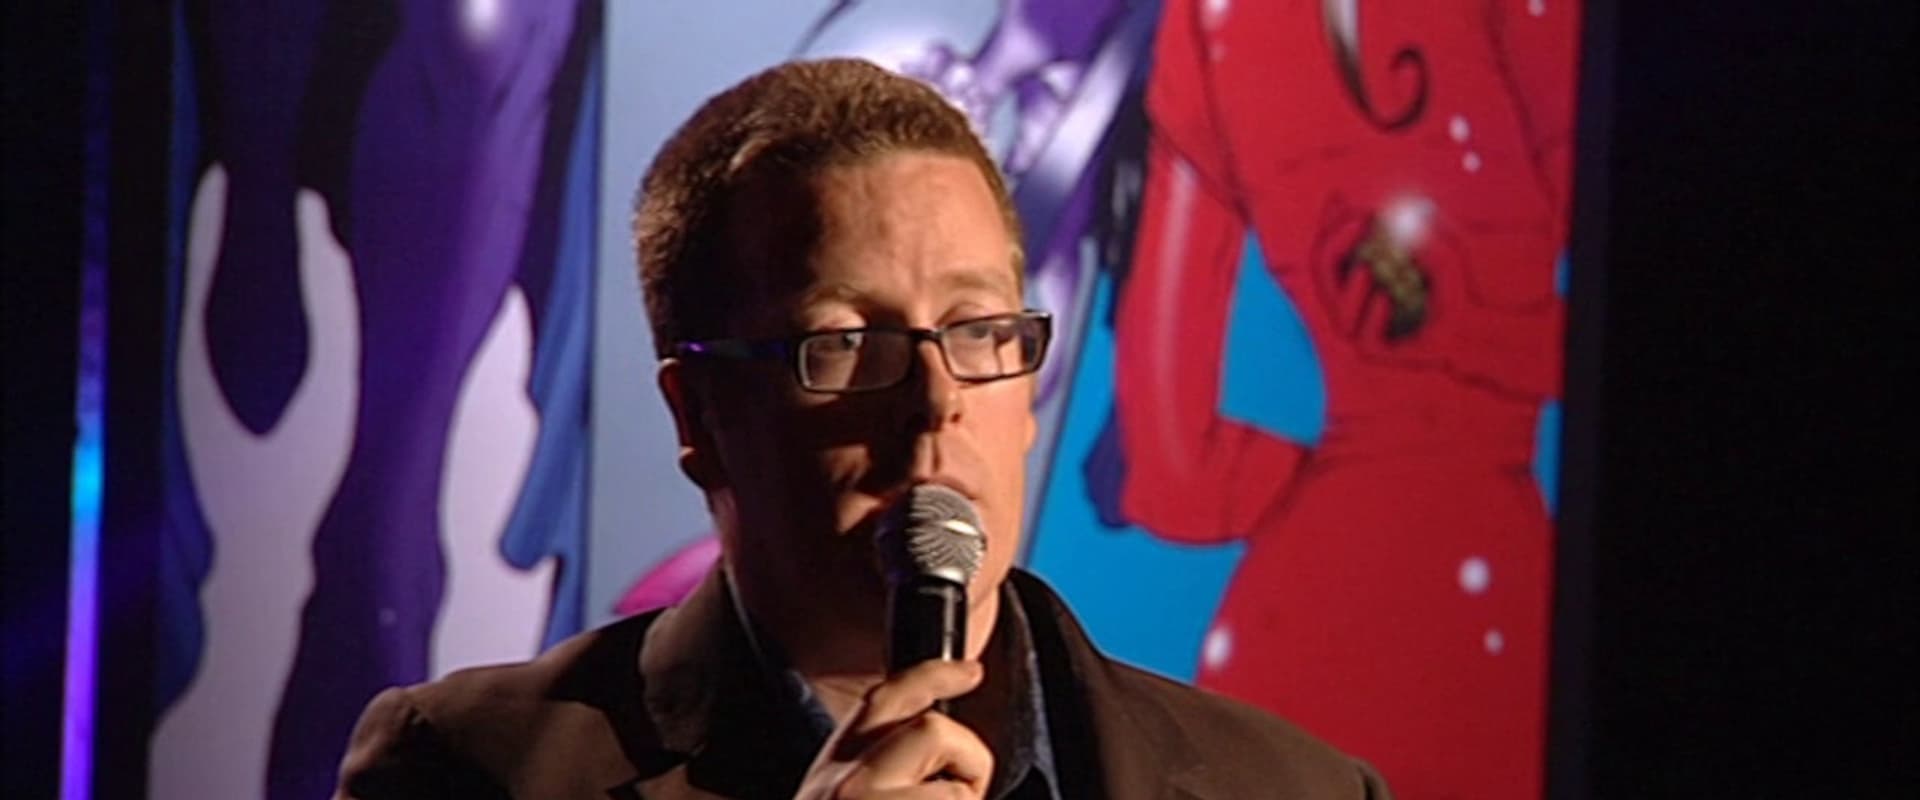 Frankie Boyle: If I Could Reach Out Through Your TV and Strangle You, I Would